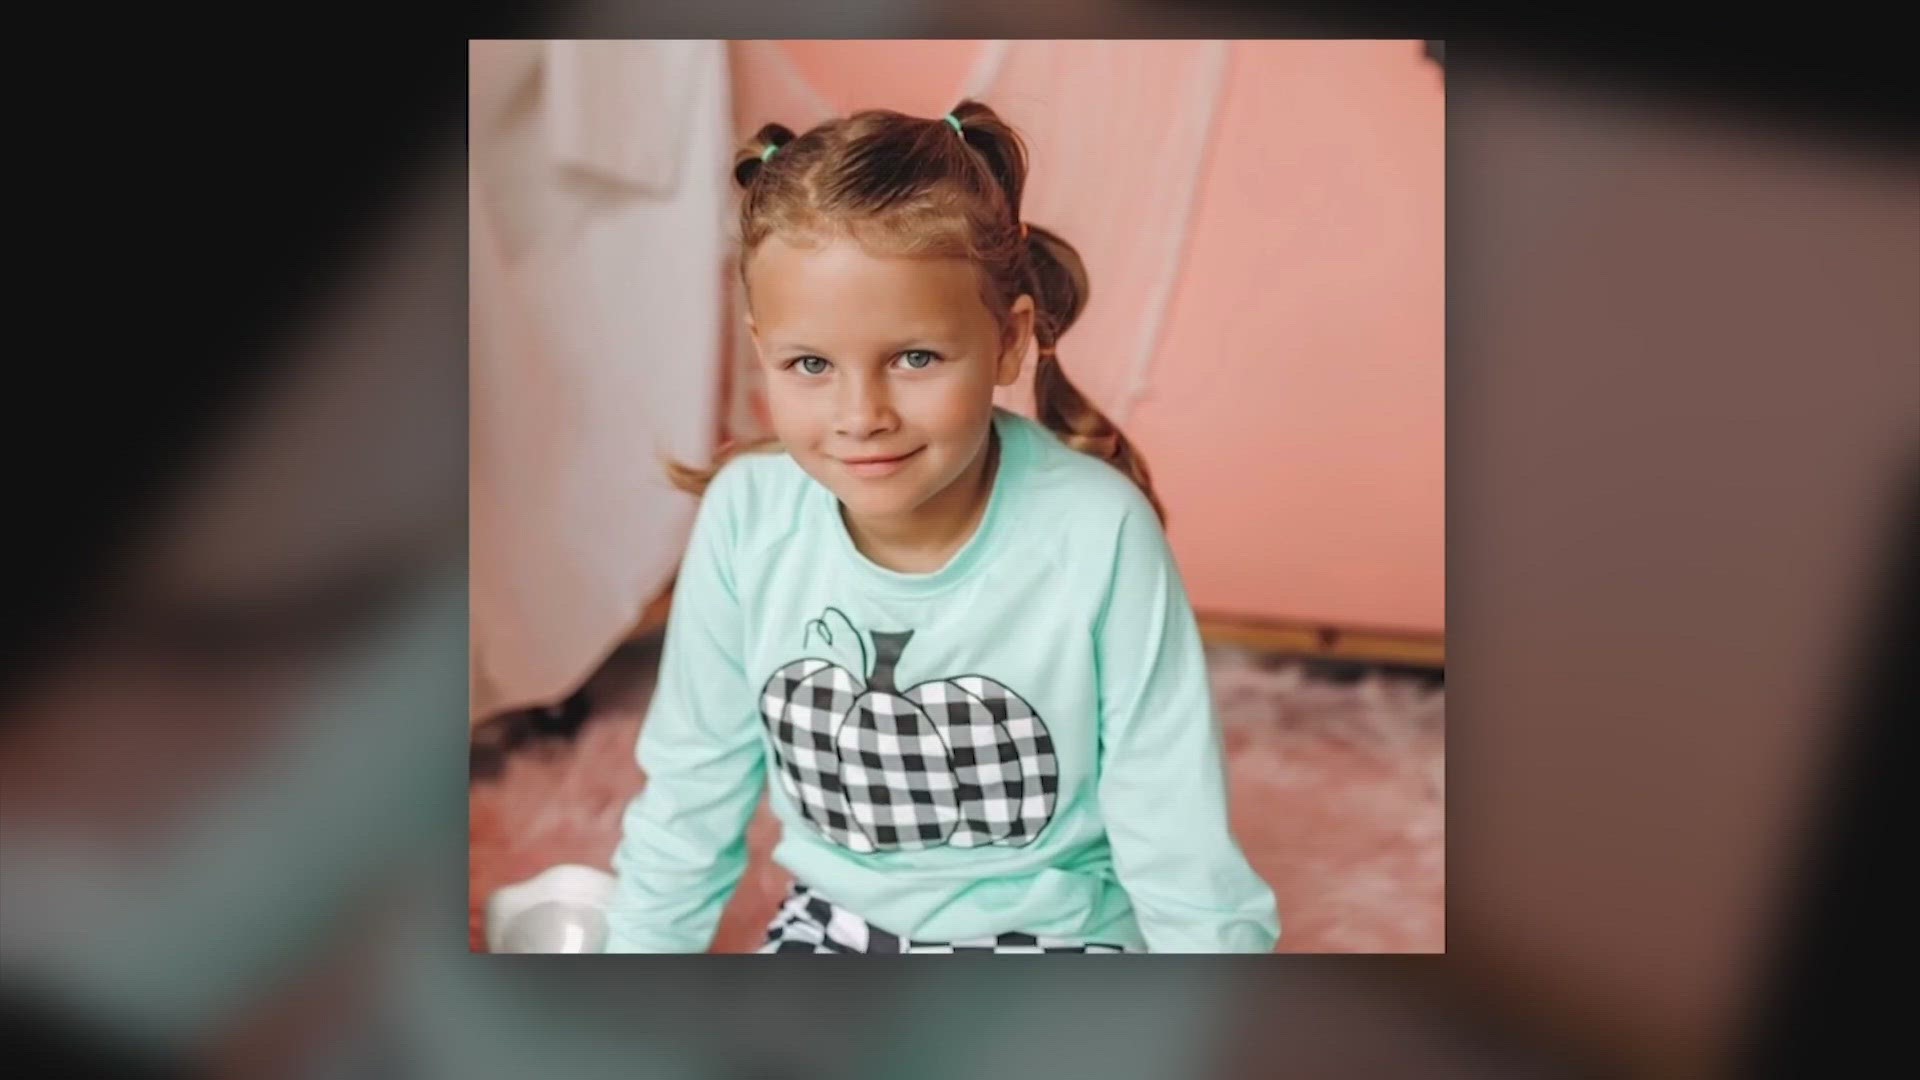 An AMBER Alert wasn't issued for Athena Strand until nearly a day after she was last seen. At the time, the case didn't fully meet AMBER Alert criteria.